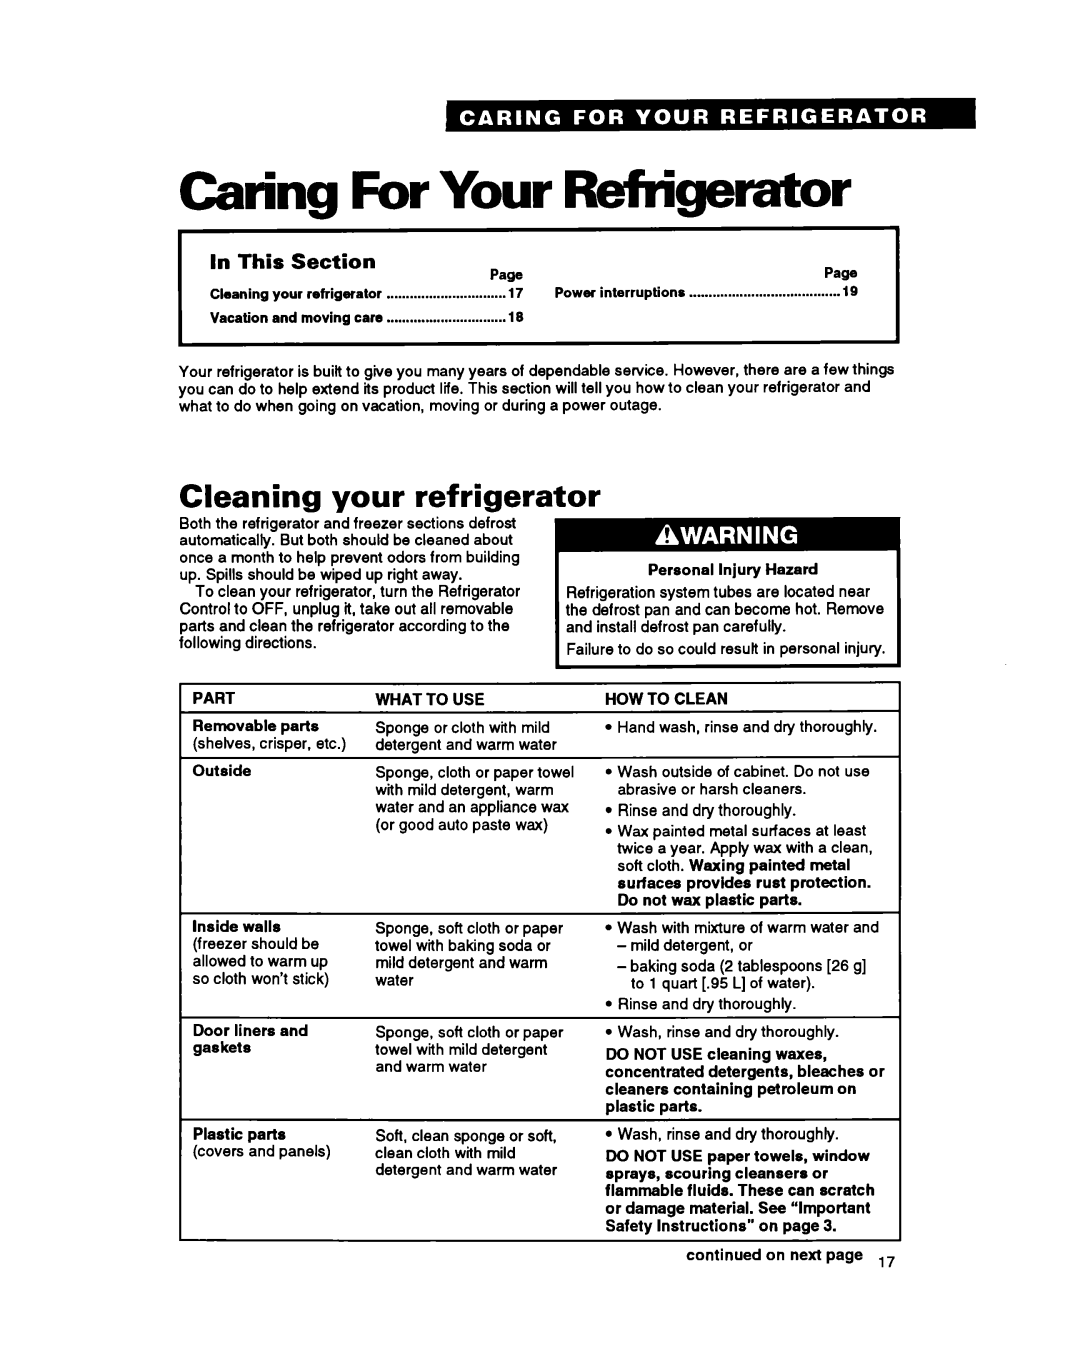 Whirlpool ED20ZK, ED22ZR, ED20PK warranty Caring For Your Refrigerator, Cleaning your refrigerator, In This Section PagePaw 